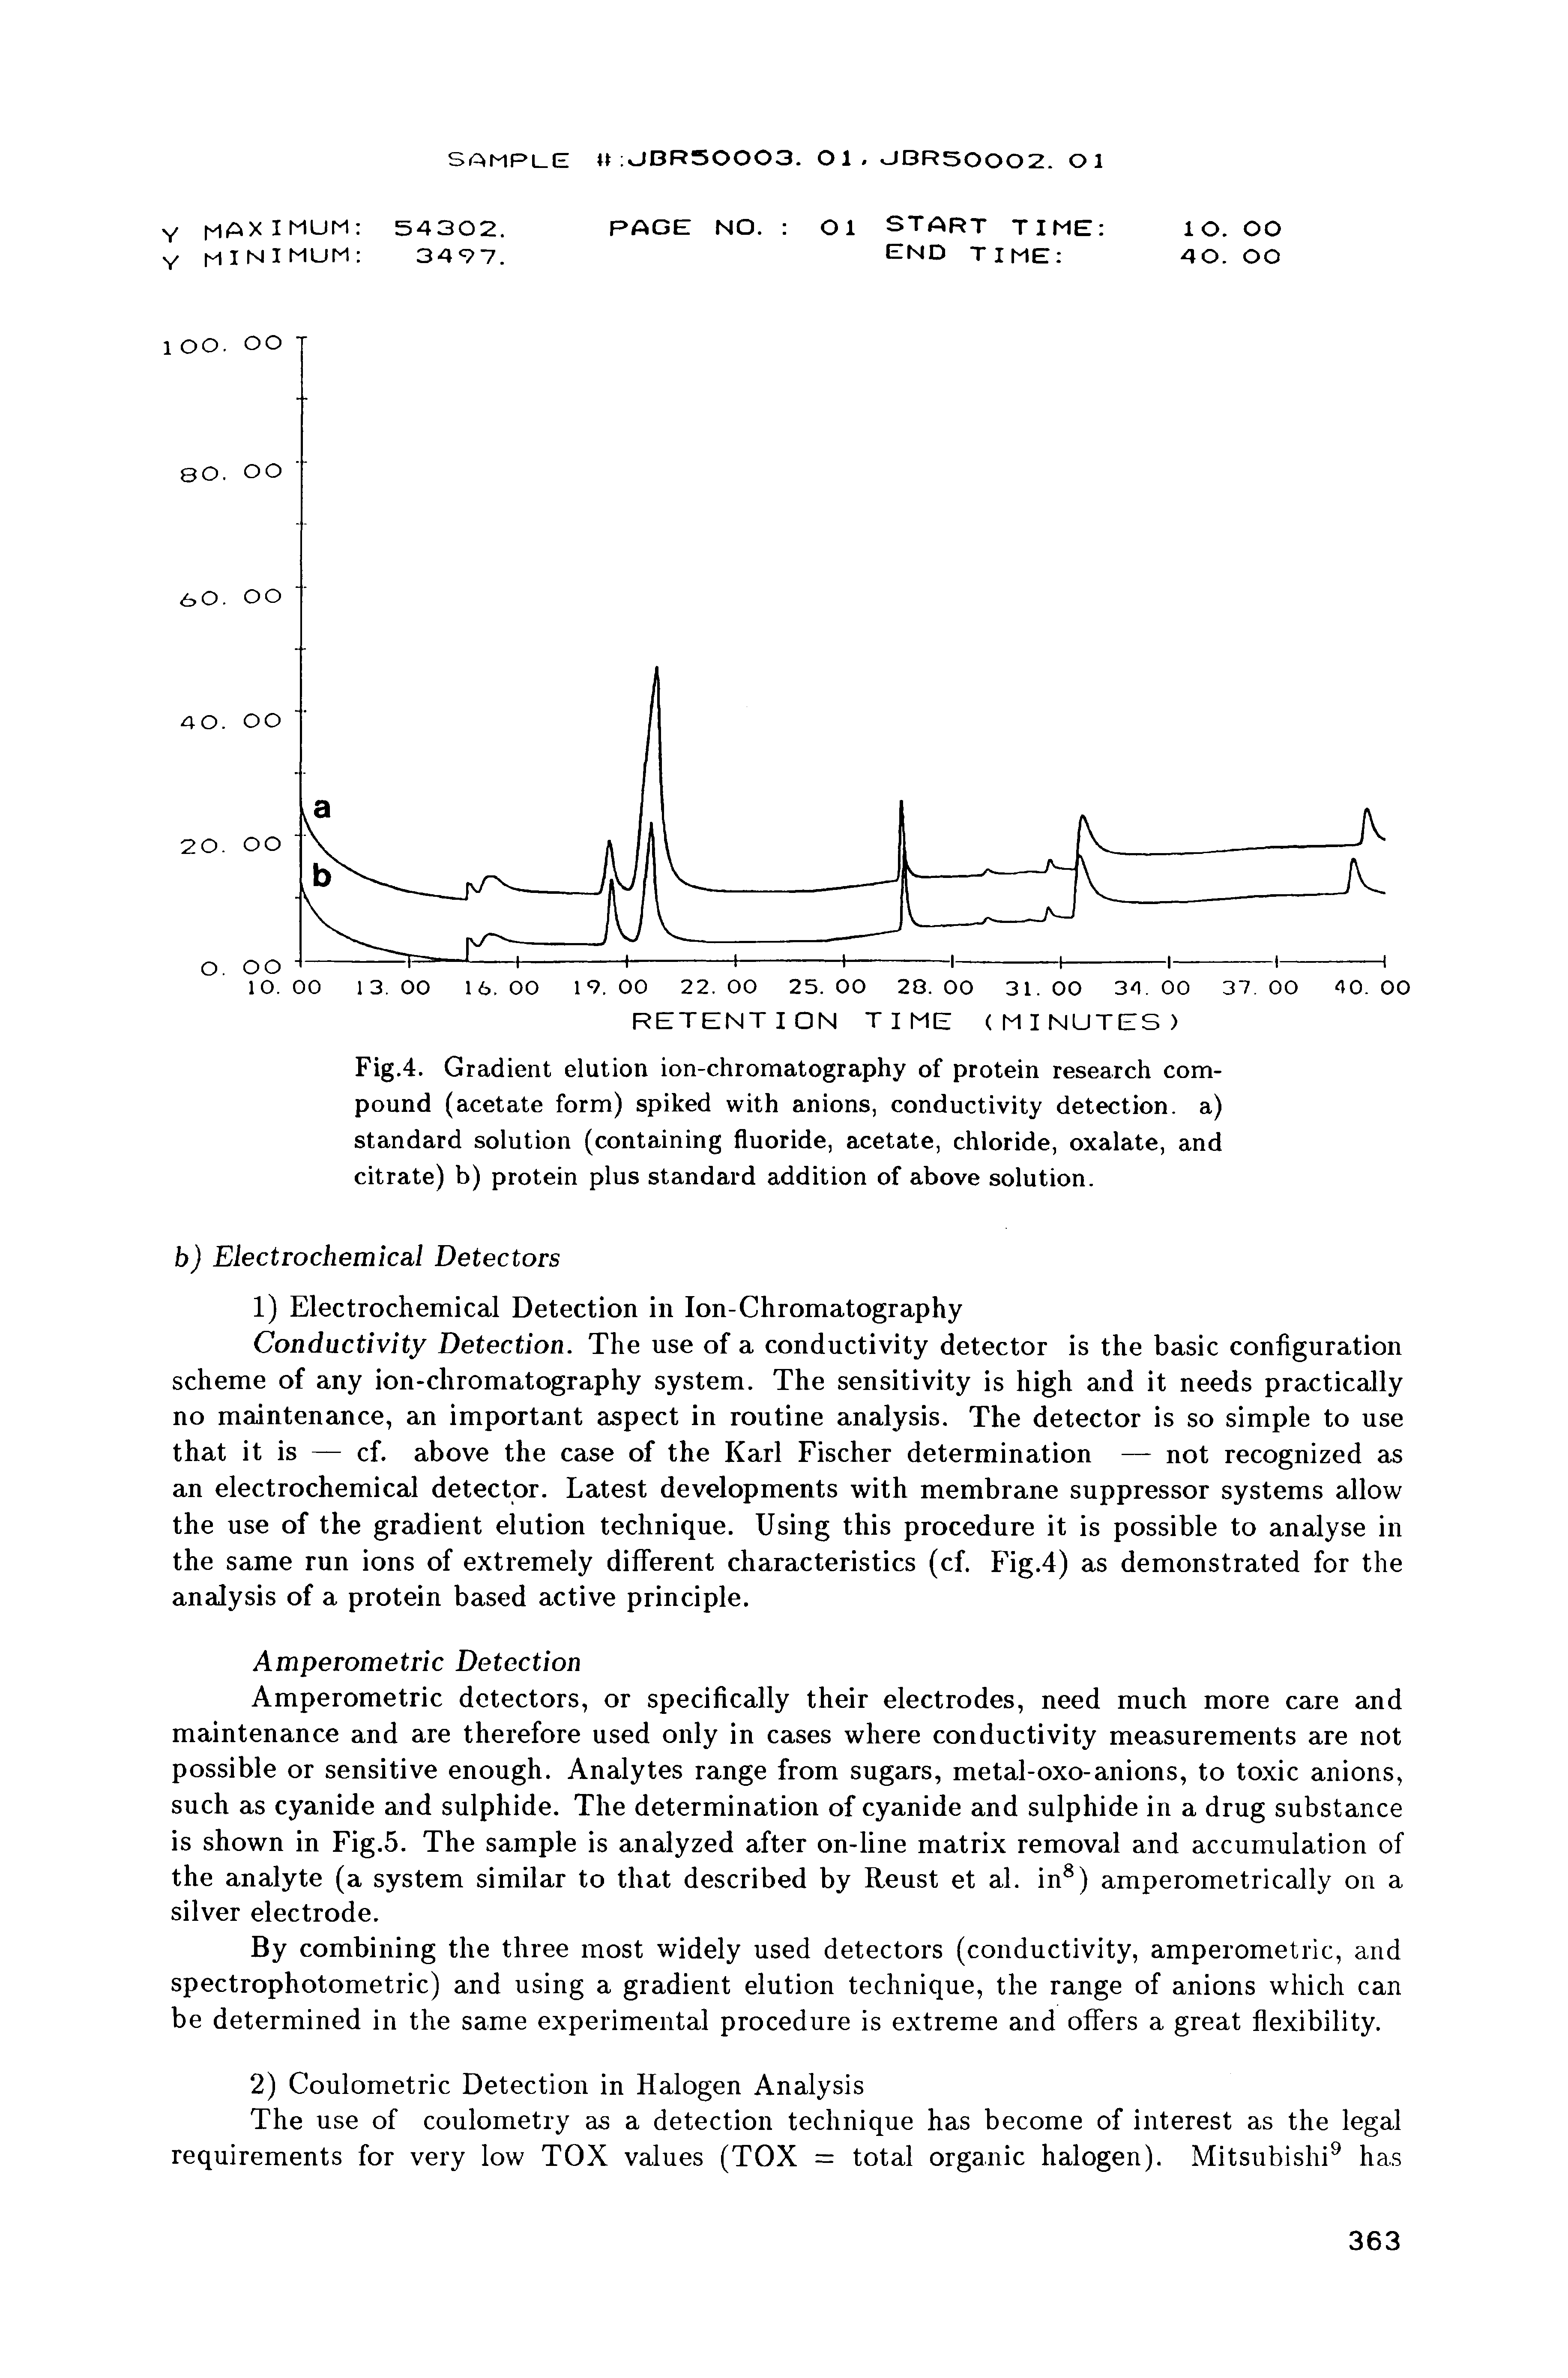 Fig.4. Gradient elution ion-chromatography of protein research compound (acetate form) spiked with anions, conductivity detection, a) standard solution (containing fluoride, acetate, chloride, oxalate, and citrate) b) protein plus standard addition of above solution.